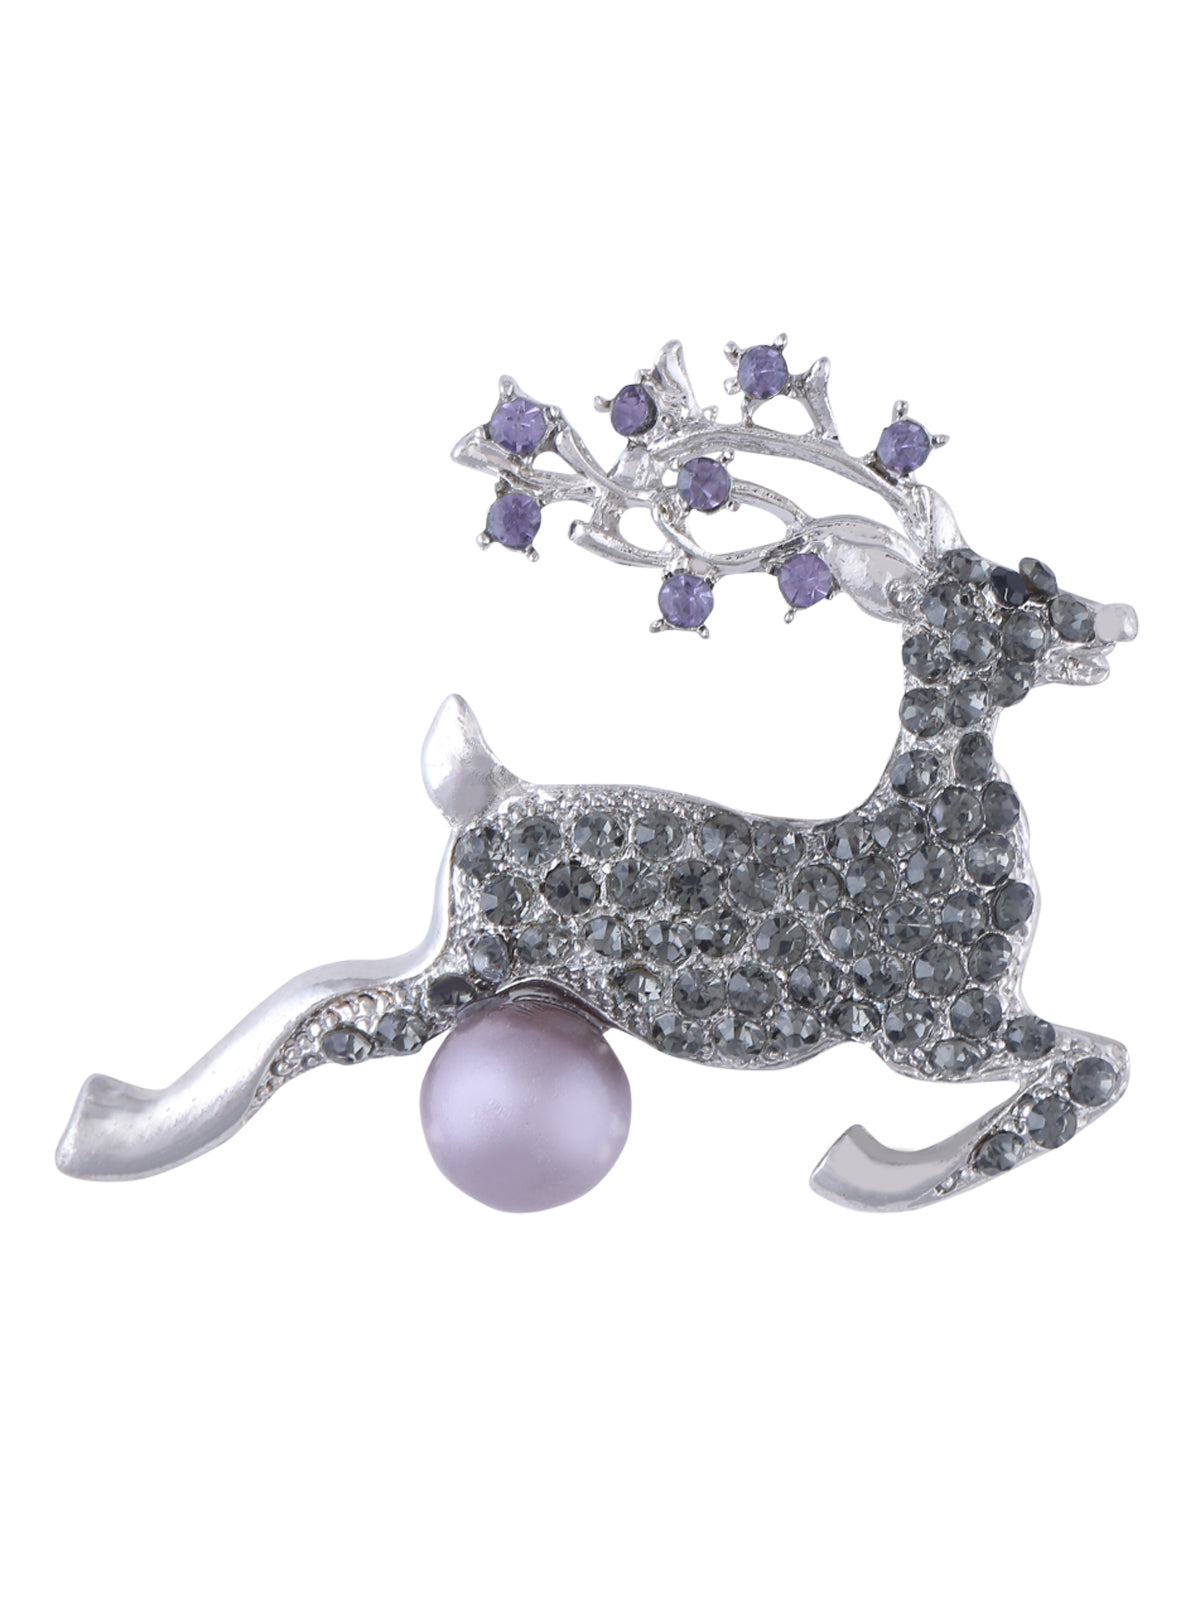 Classic Embellished with Diamonds Deer Pearl Brooch Pin